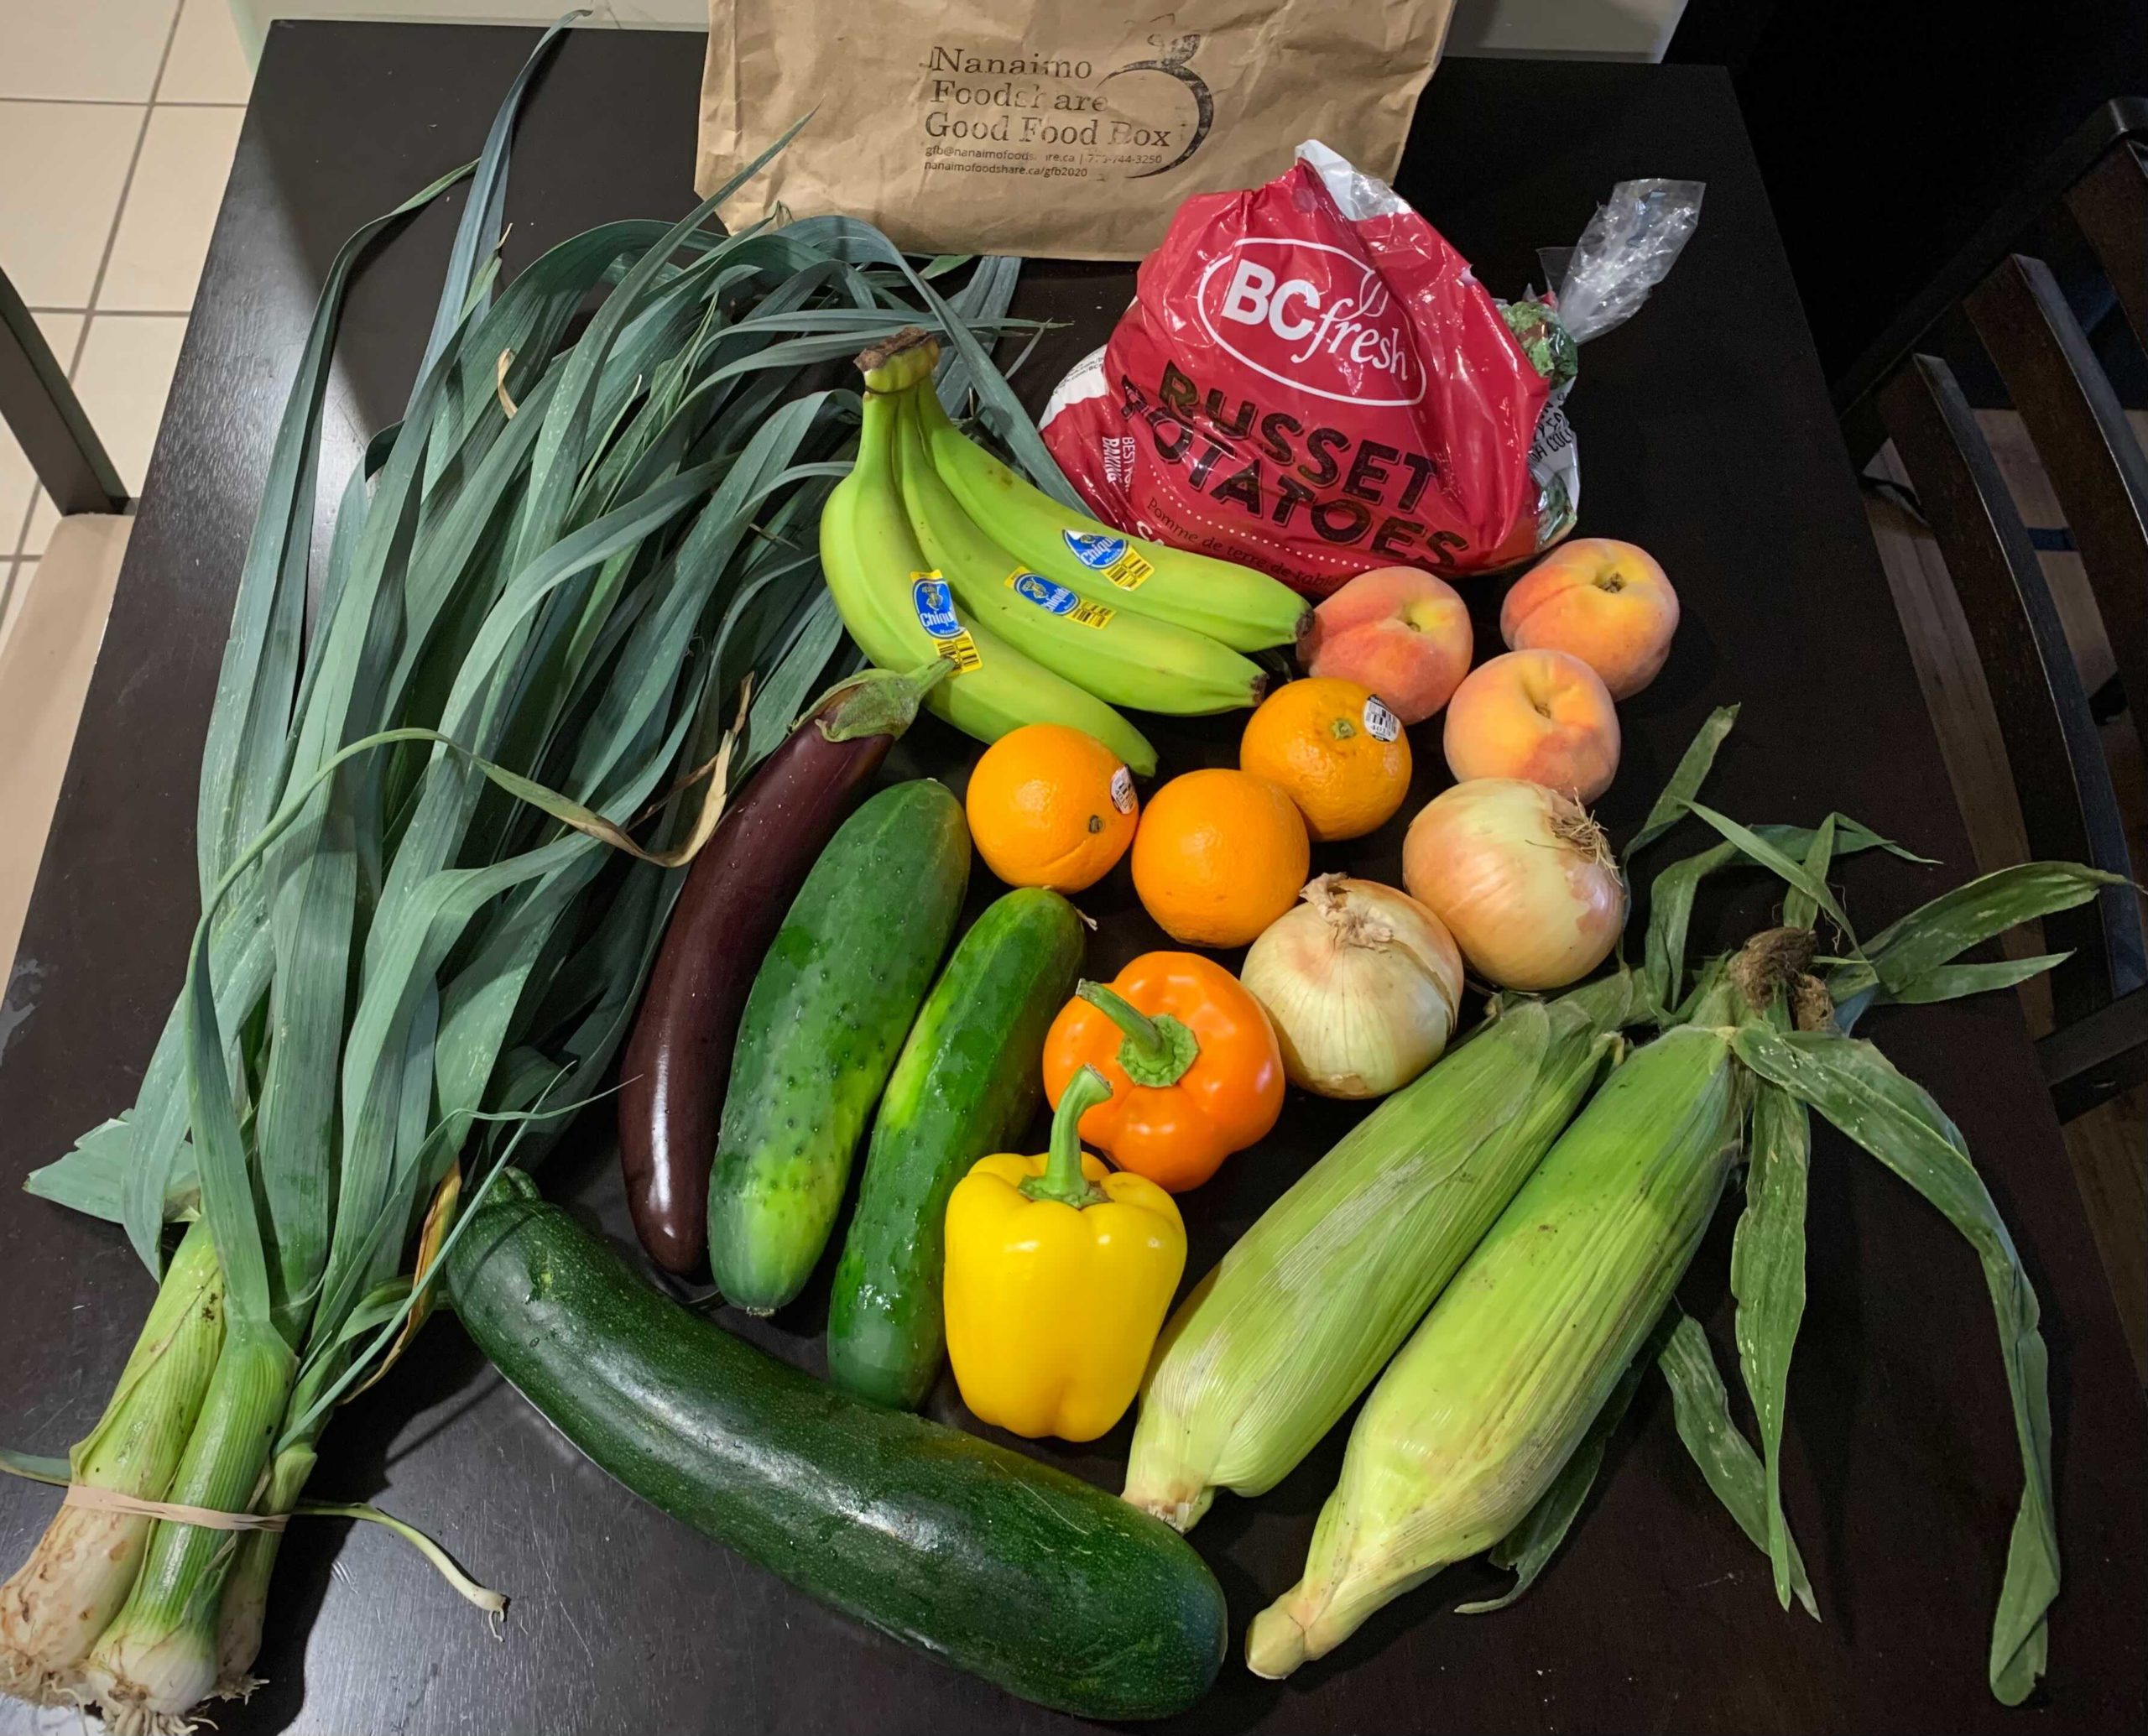 contents of the Good Food box, it consists of green onions, corn, oranges, peppers, zucchinii, onions, bananas, and potatoes.